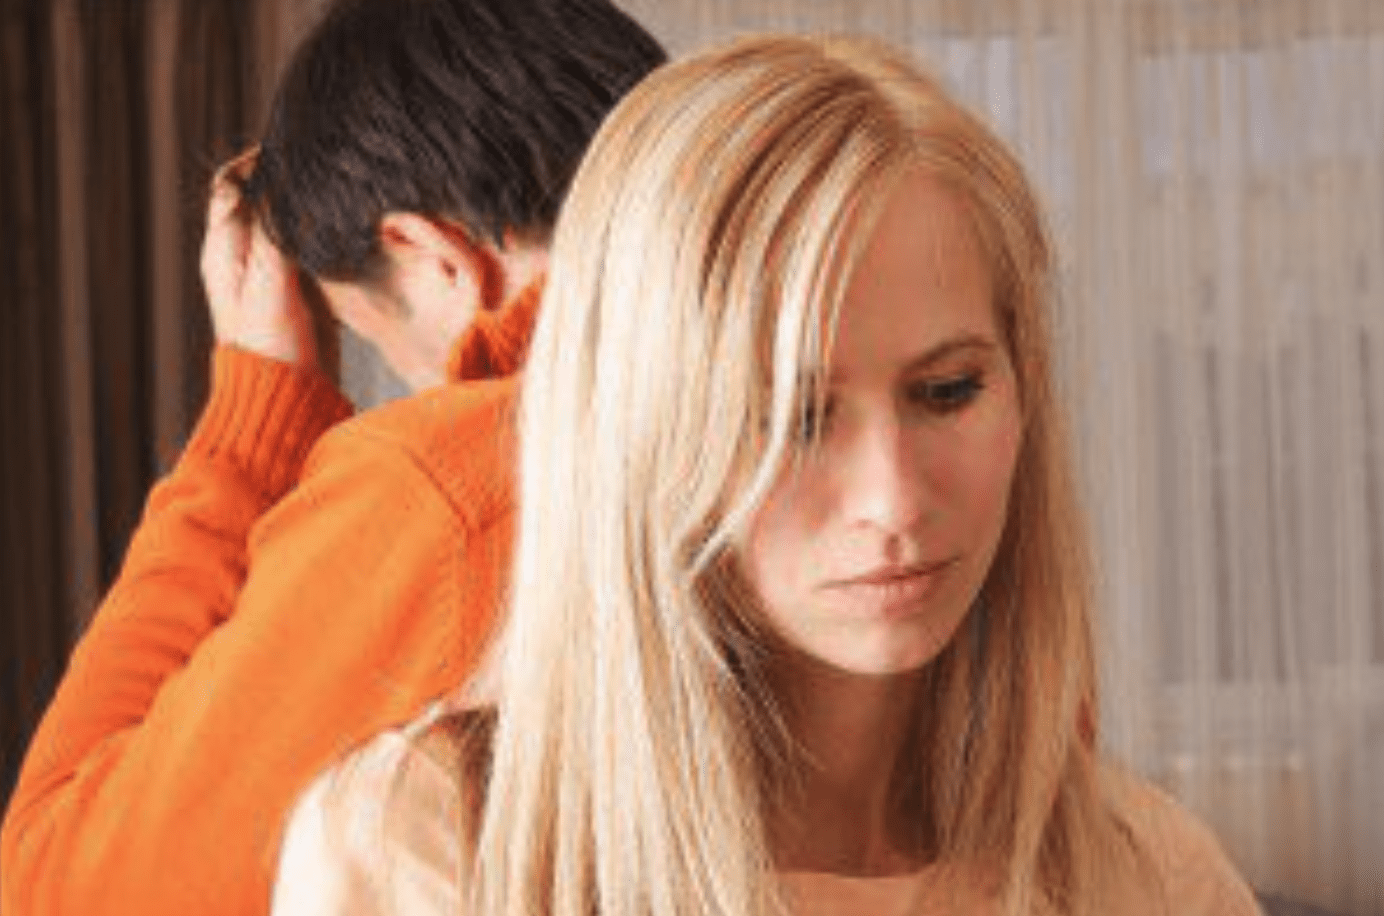 10 Symptoms Of A STRUGGLING MARRIAGE